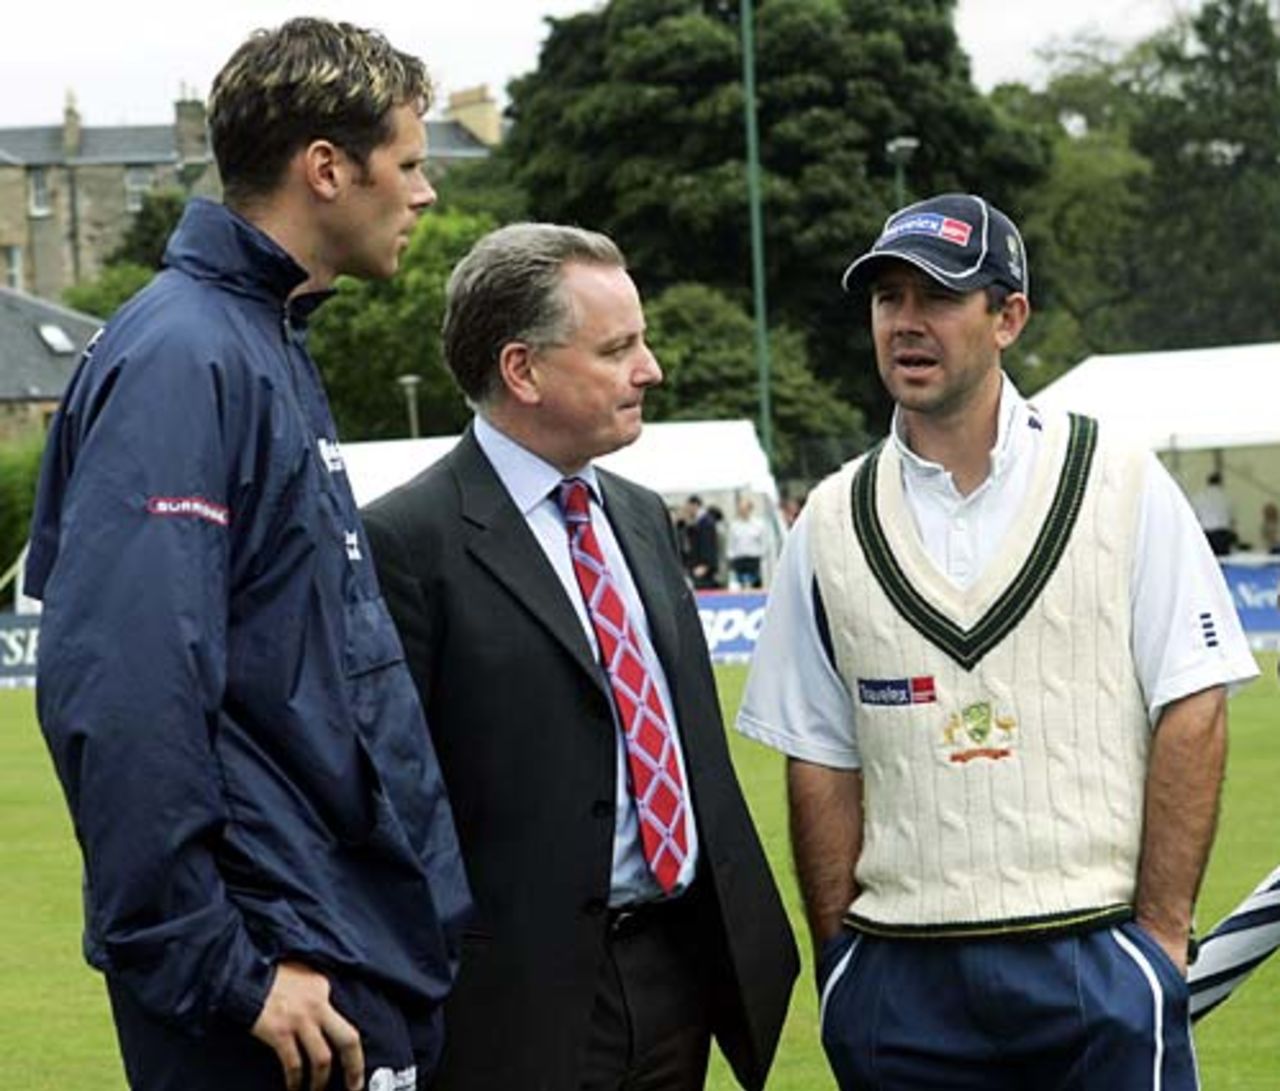 Craig Wright, Jack McConnell, first minister of Scotland and Ricky Ponting chat, Scotland v Australians, Edinburgh, August 18, 2005